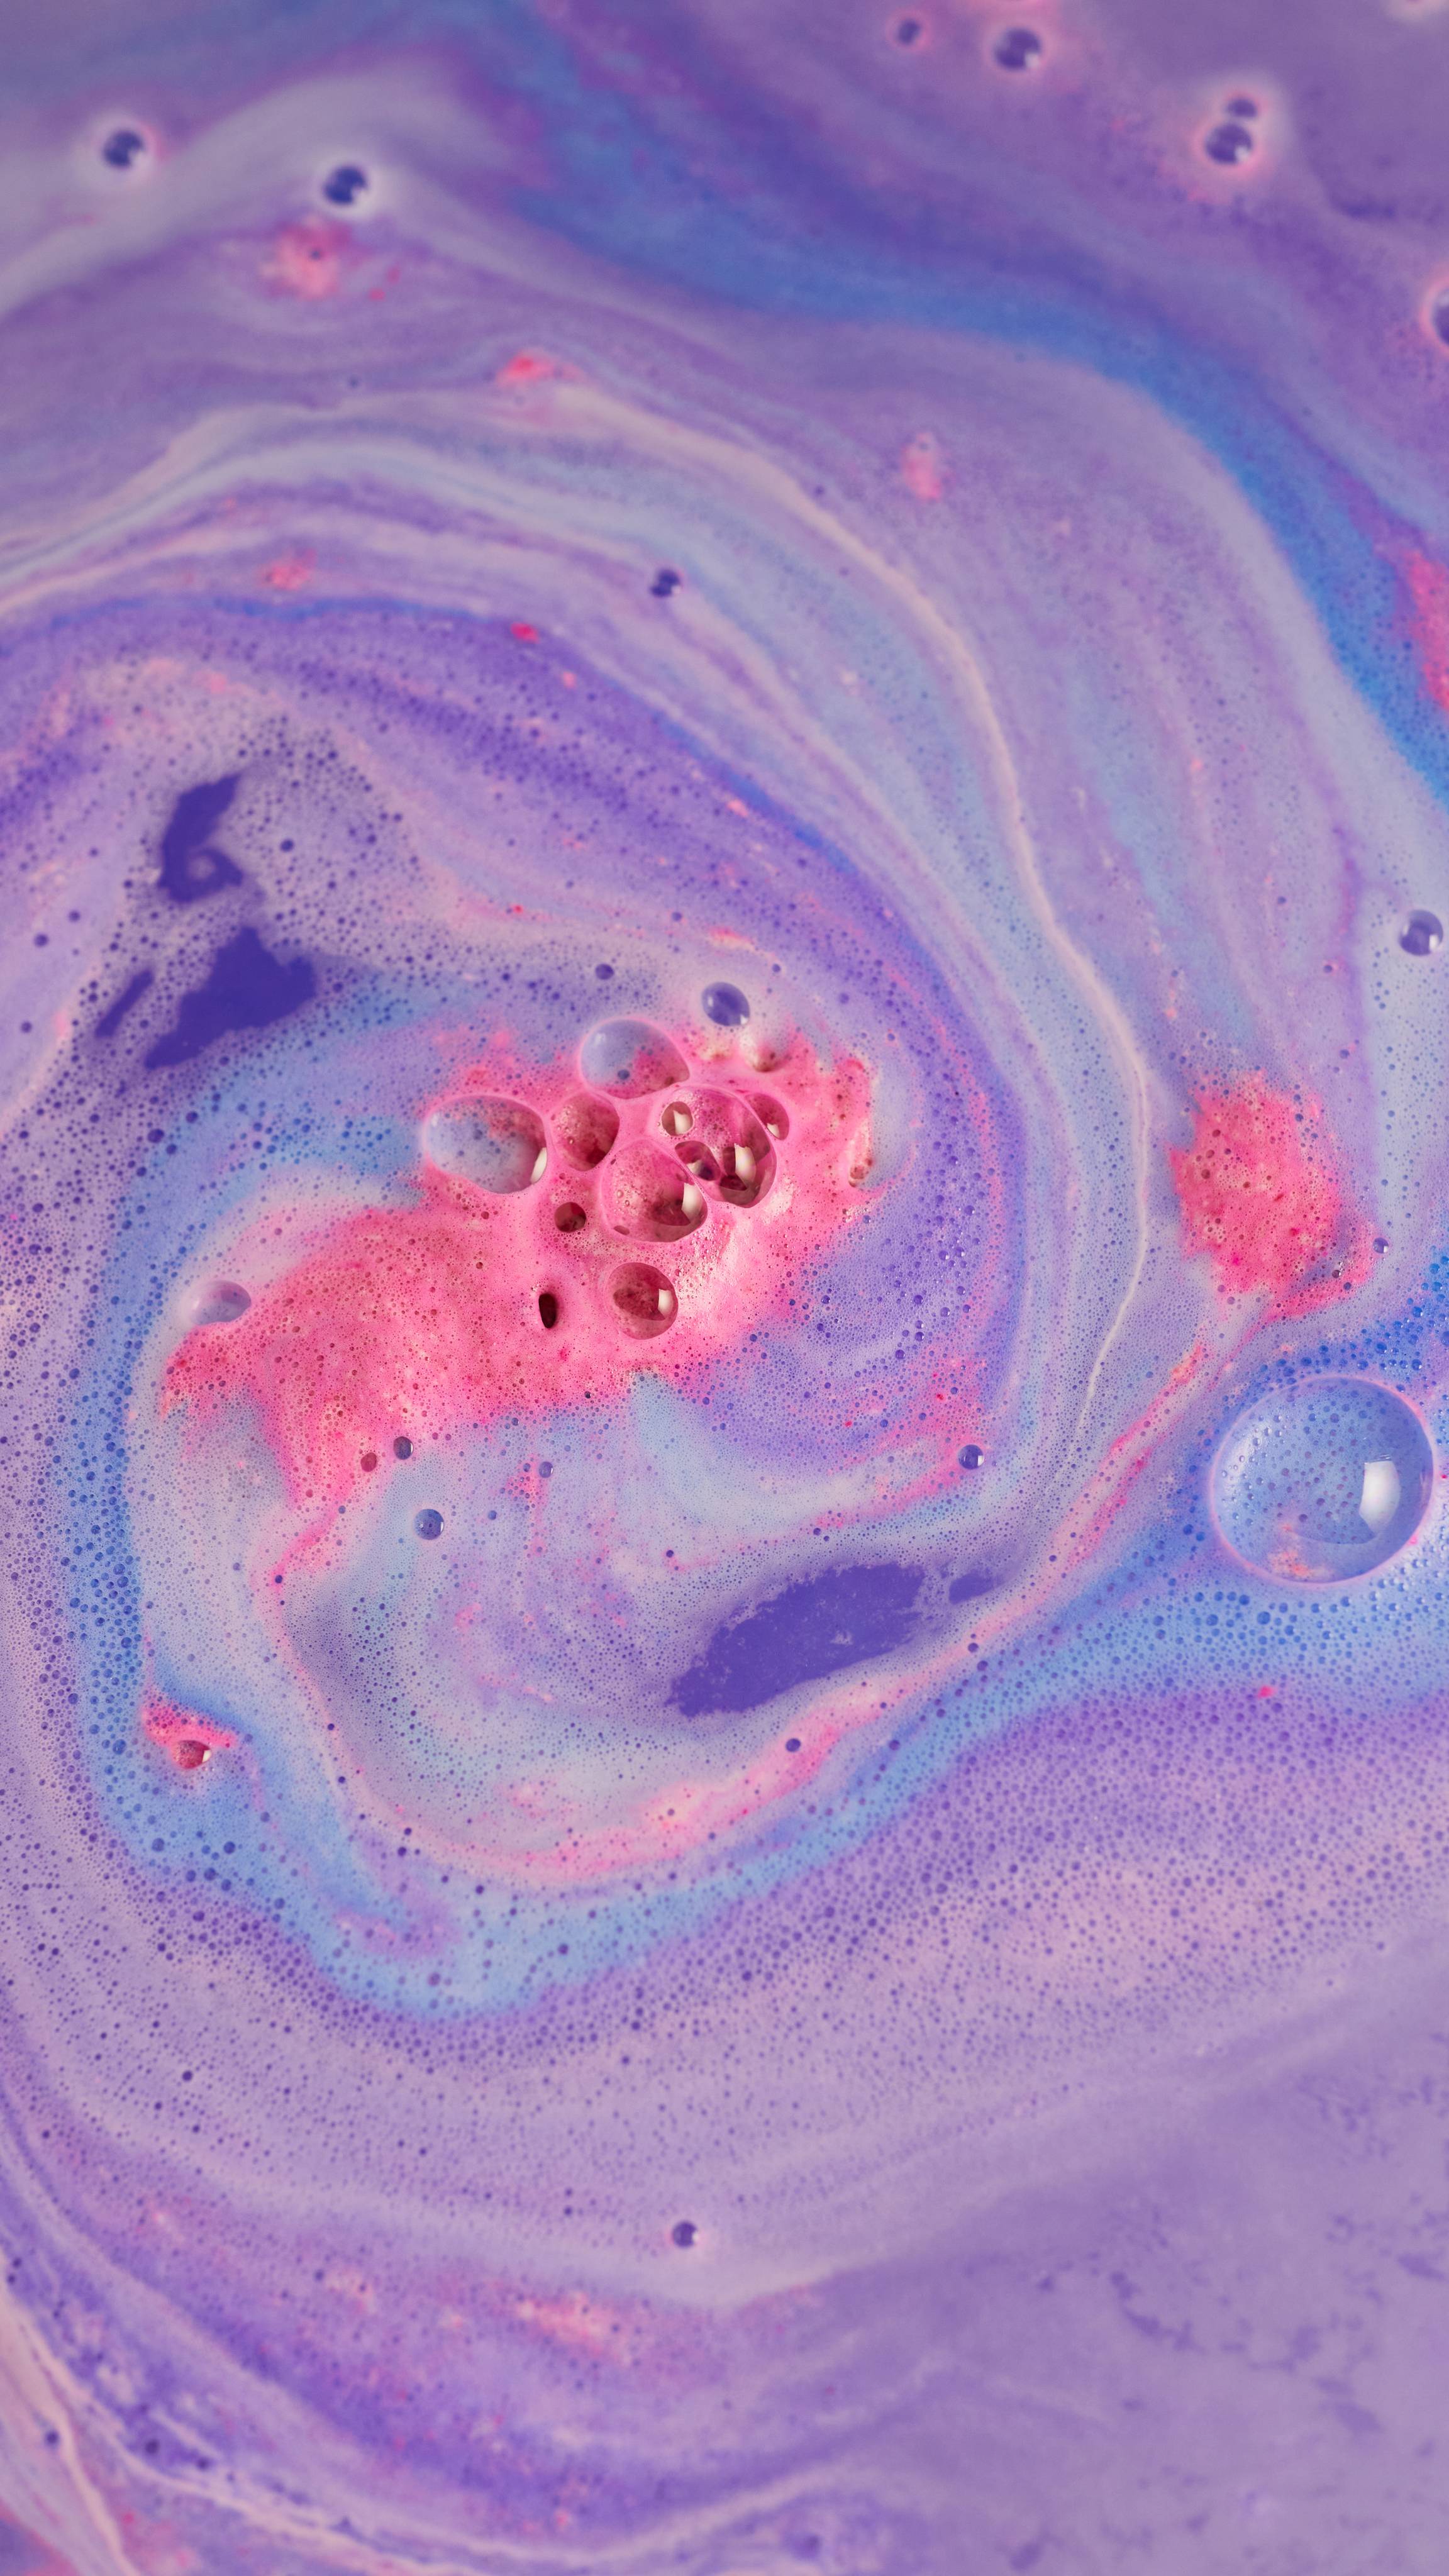 The bath bombs has completely dissolved leaving a think, velvety blanket of pink, purple and blue swirls.